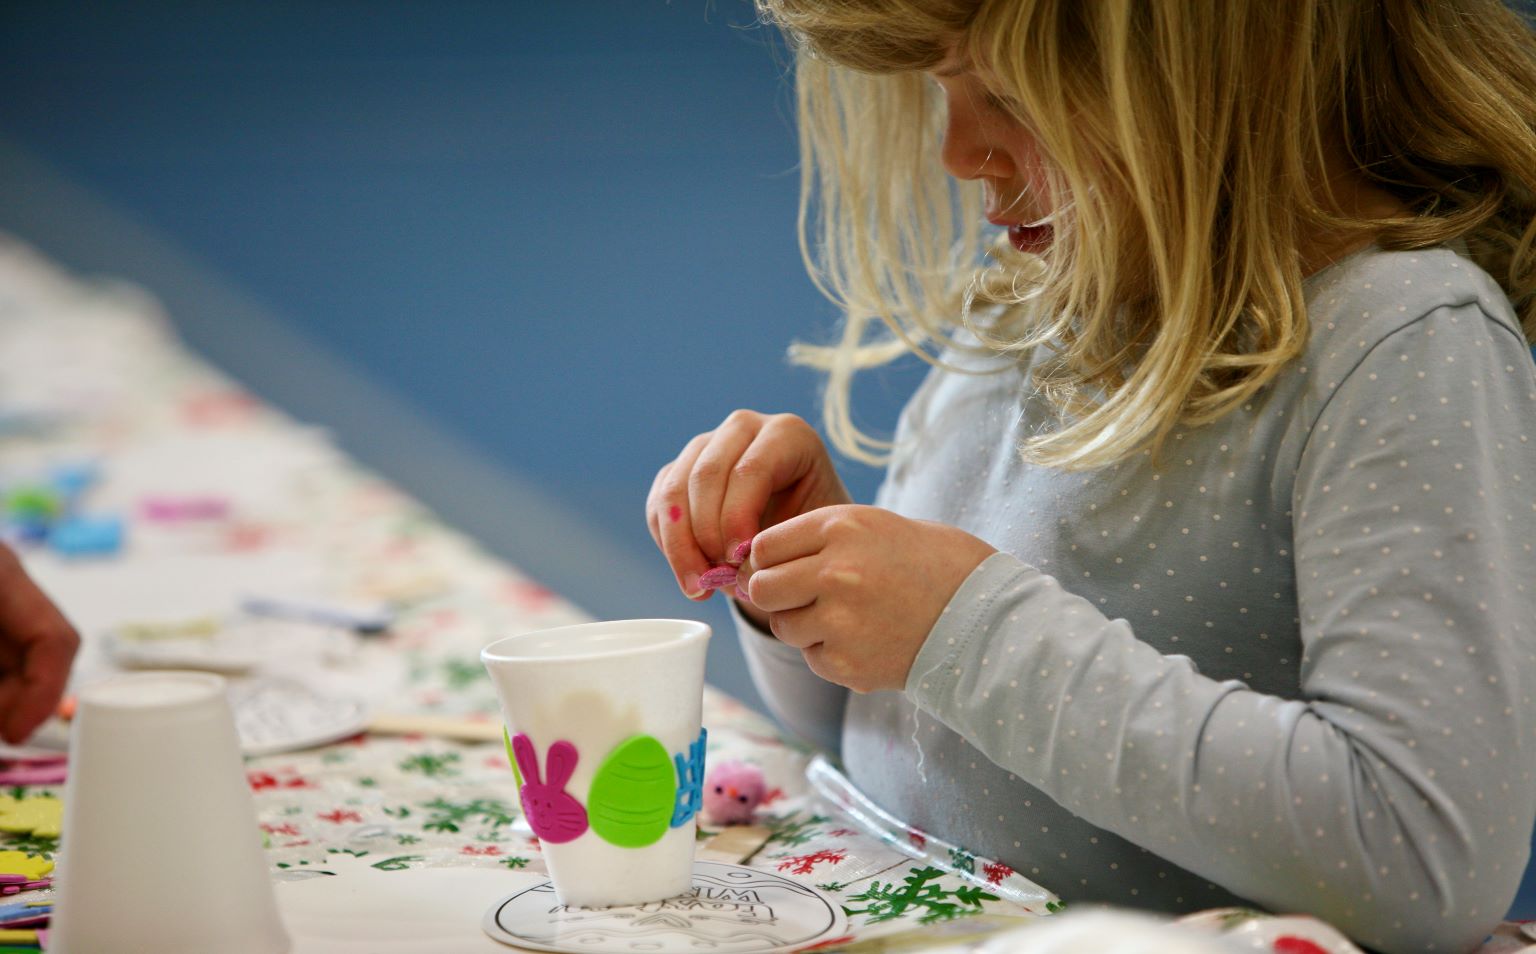 A young girl with long blonde hair is decorating a polystyrene cup with Easter stickers.